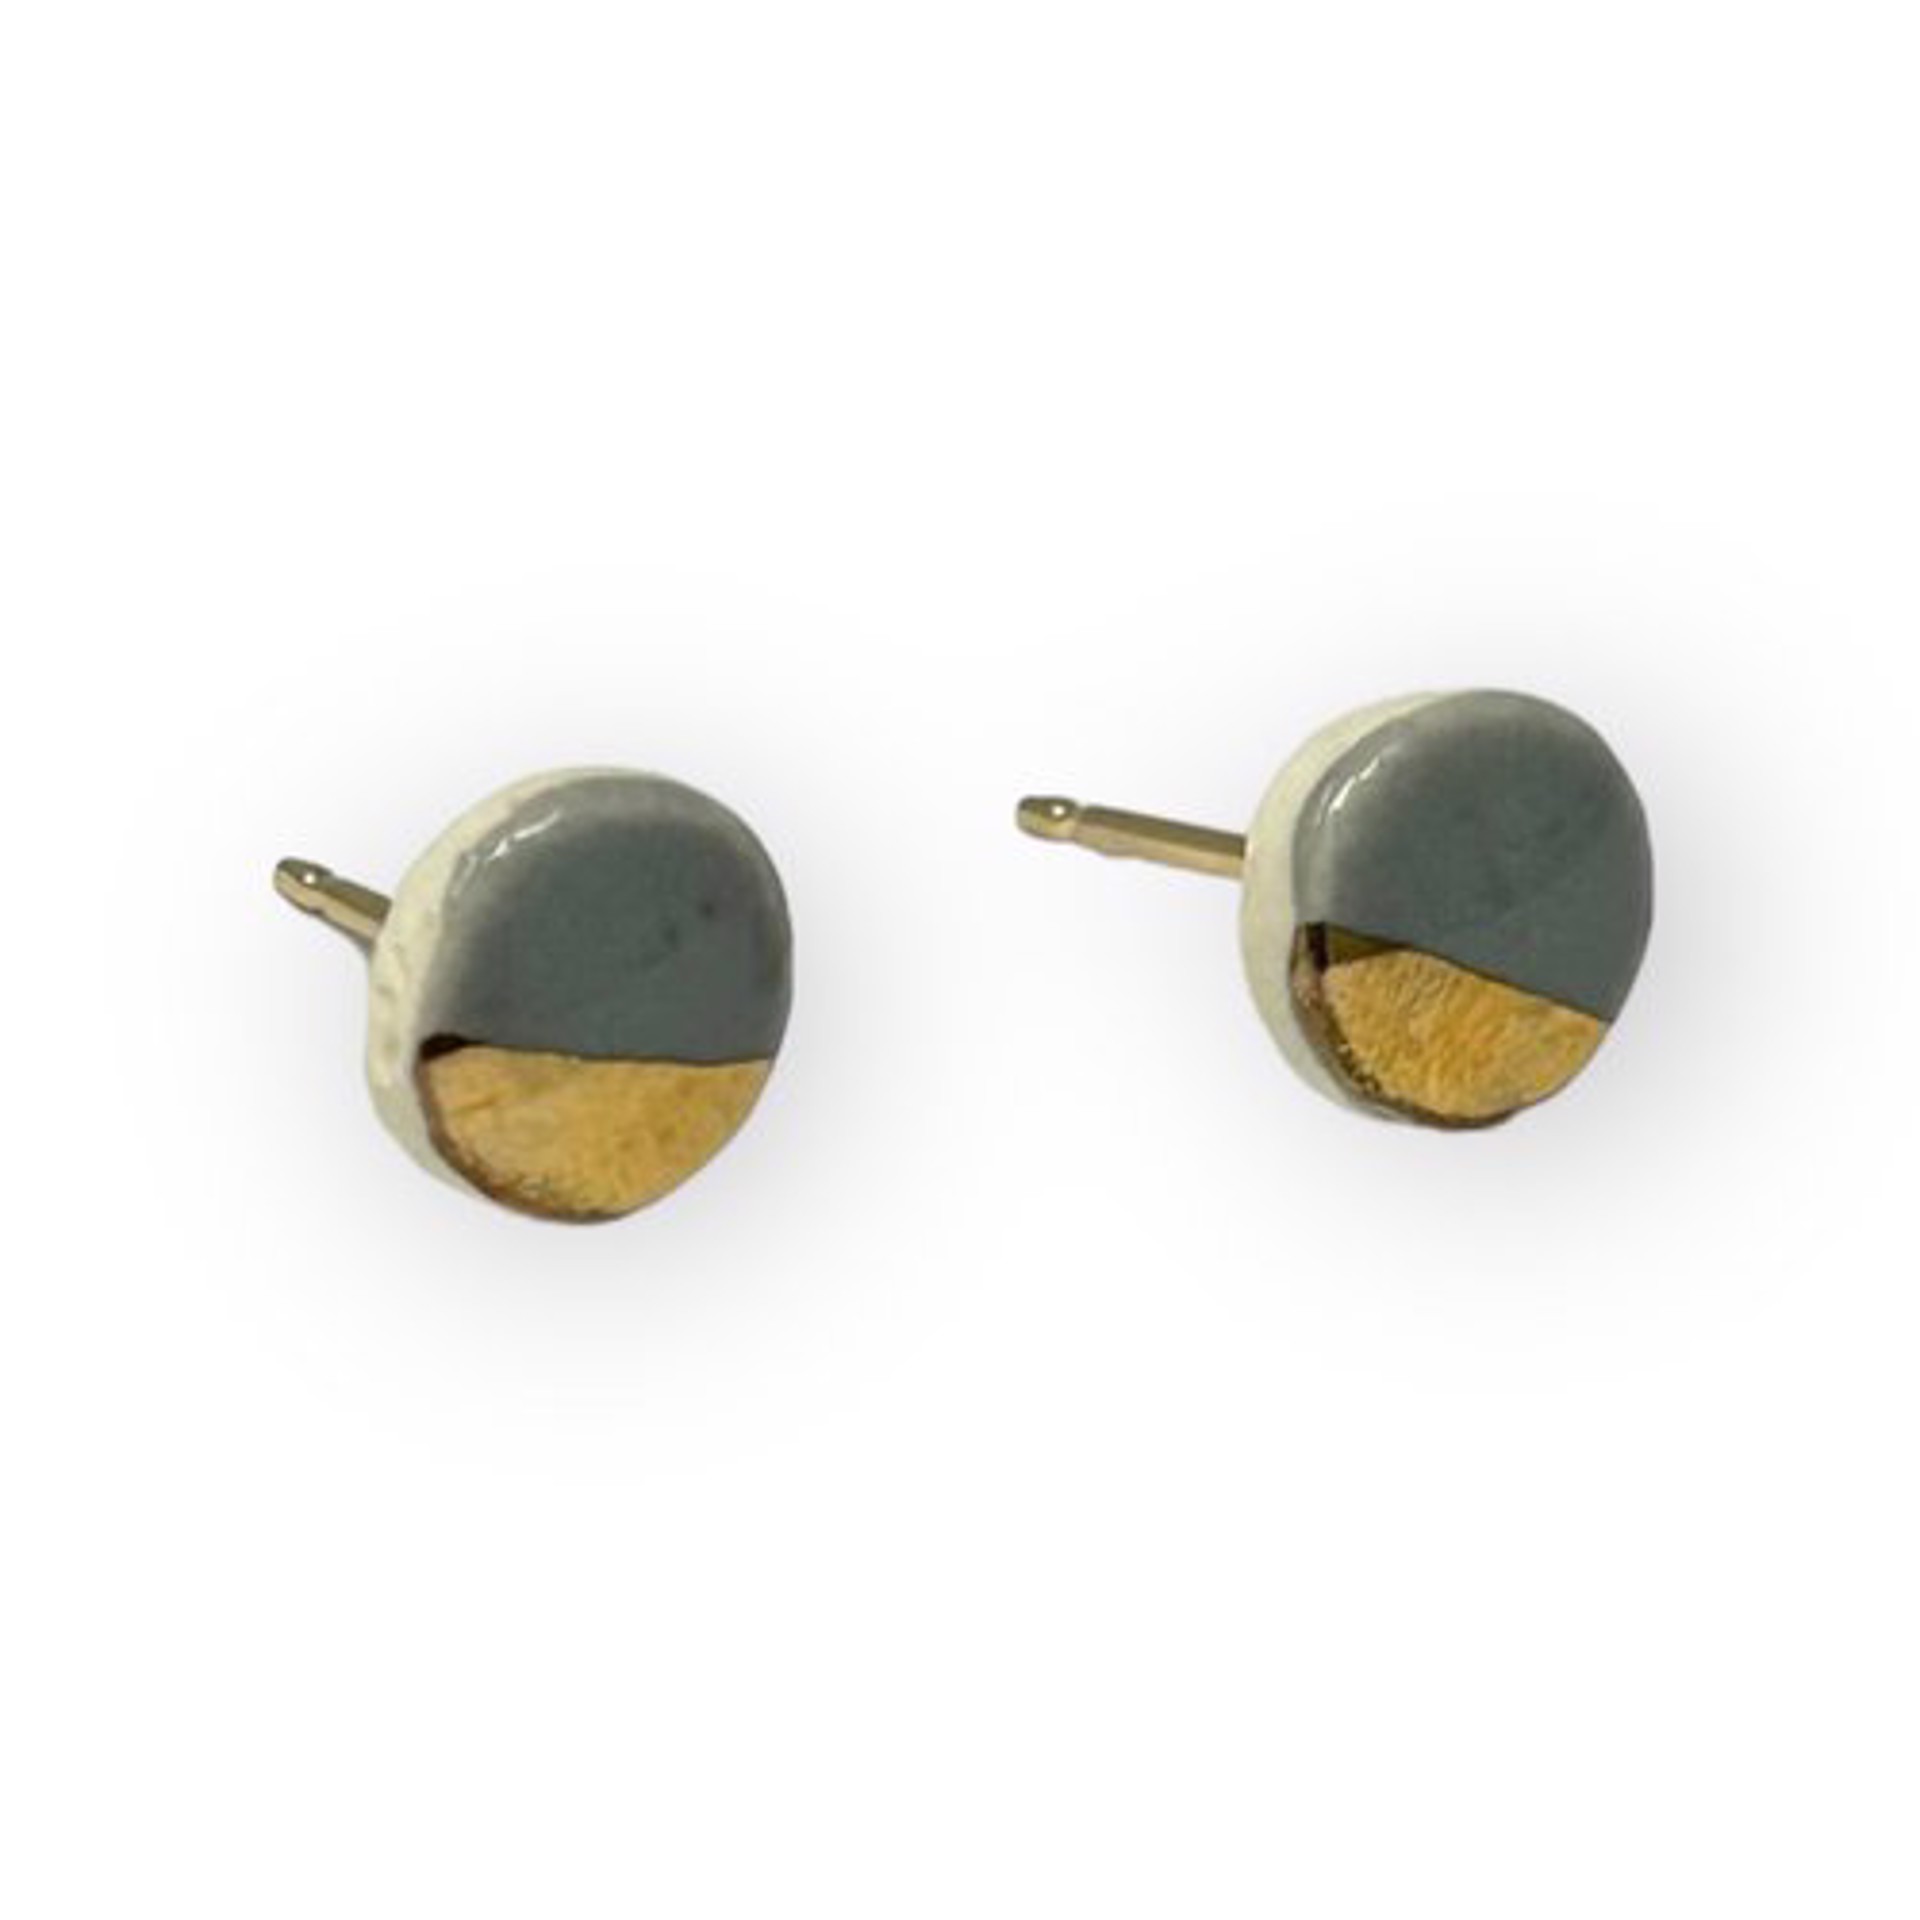 Tiny Pebble Studs - White/Gold by Zoe Comings